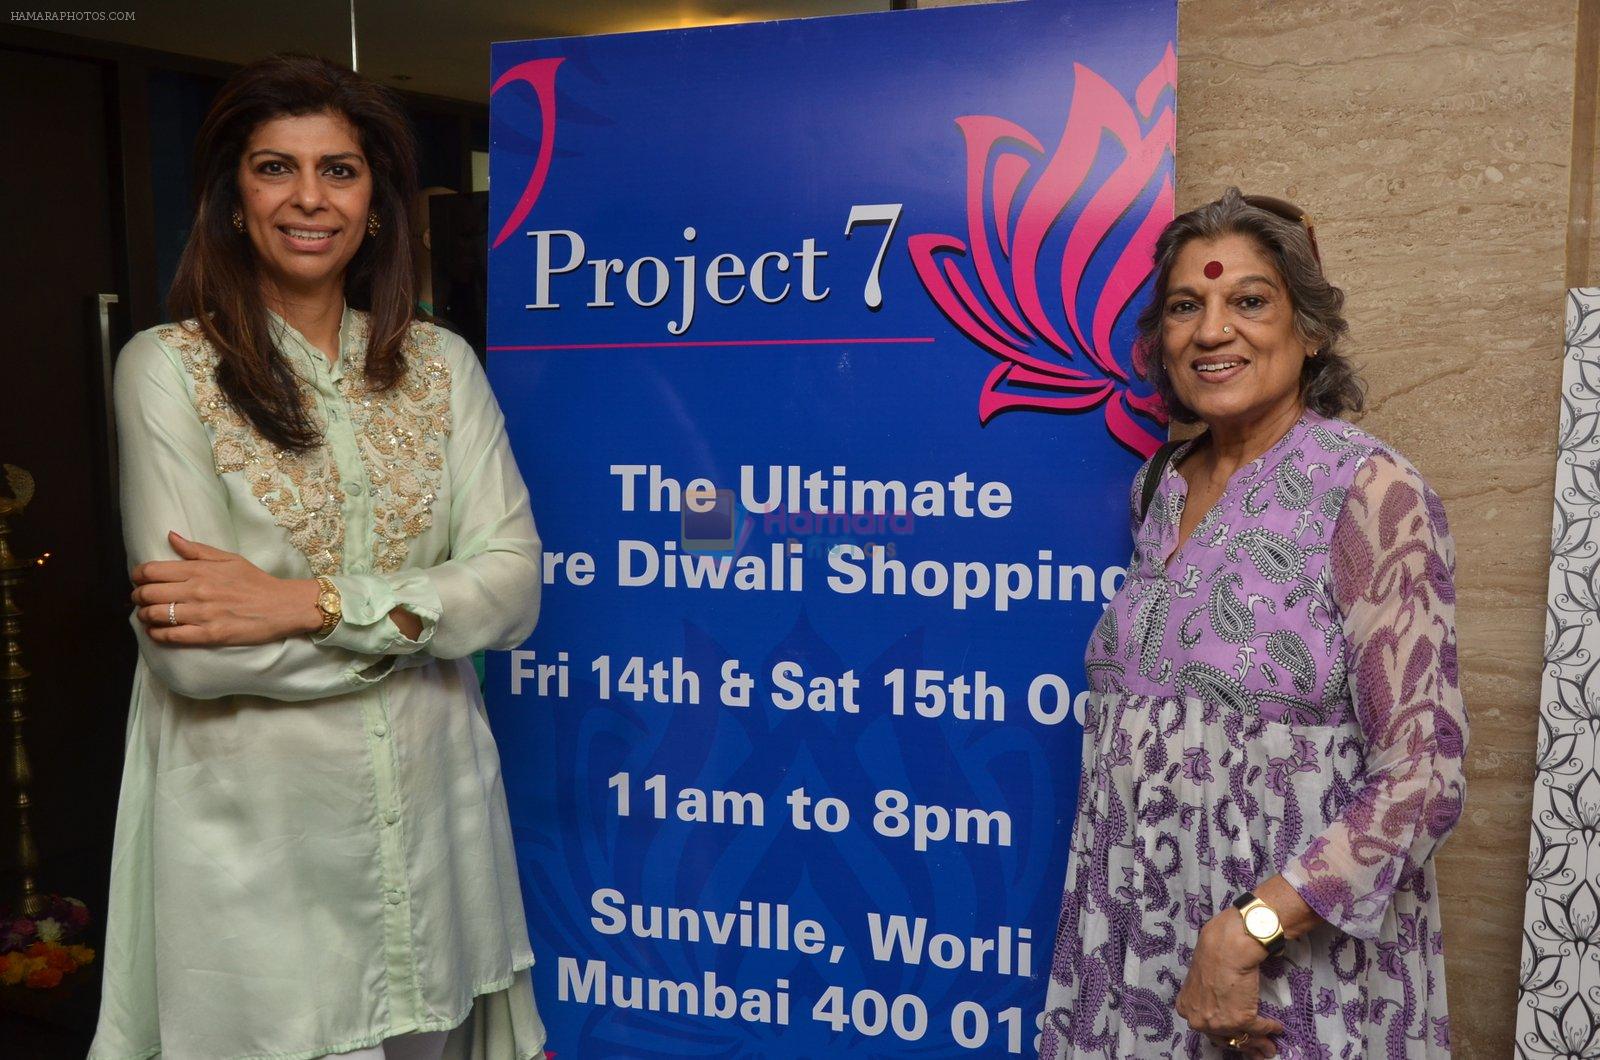 Dolly Thakore at Project 7 launch on 14th Oct 2016